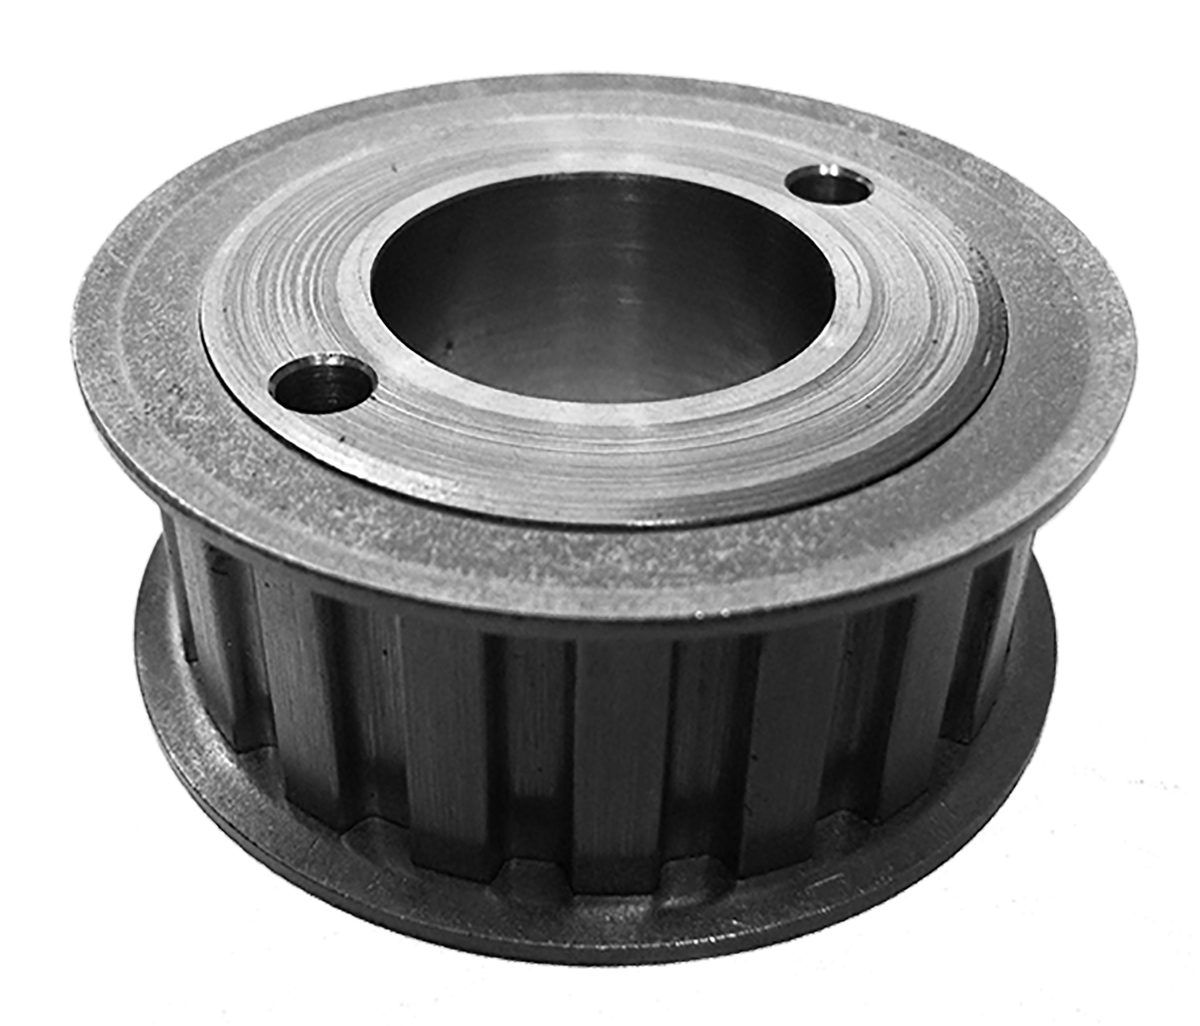 19LG075 - Steel Imperial Pitch Pulleys